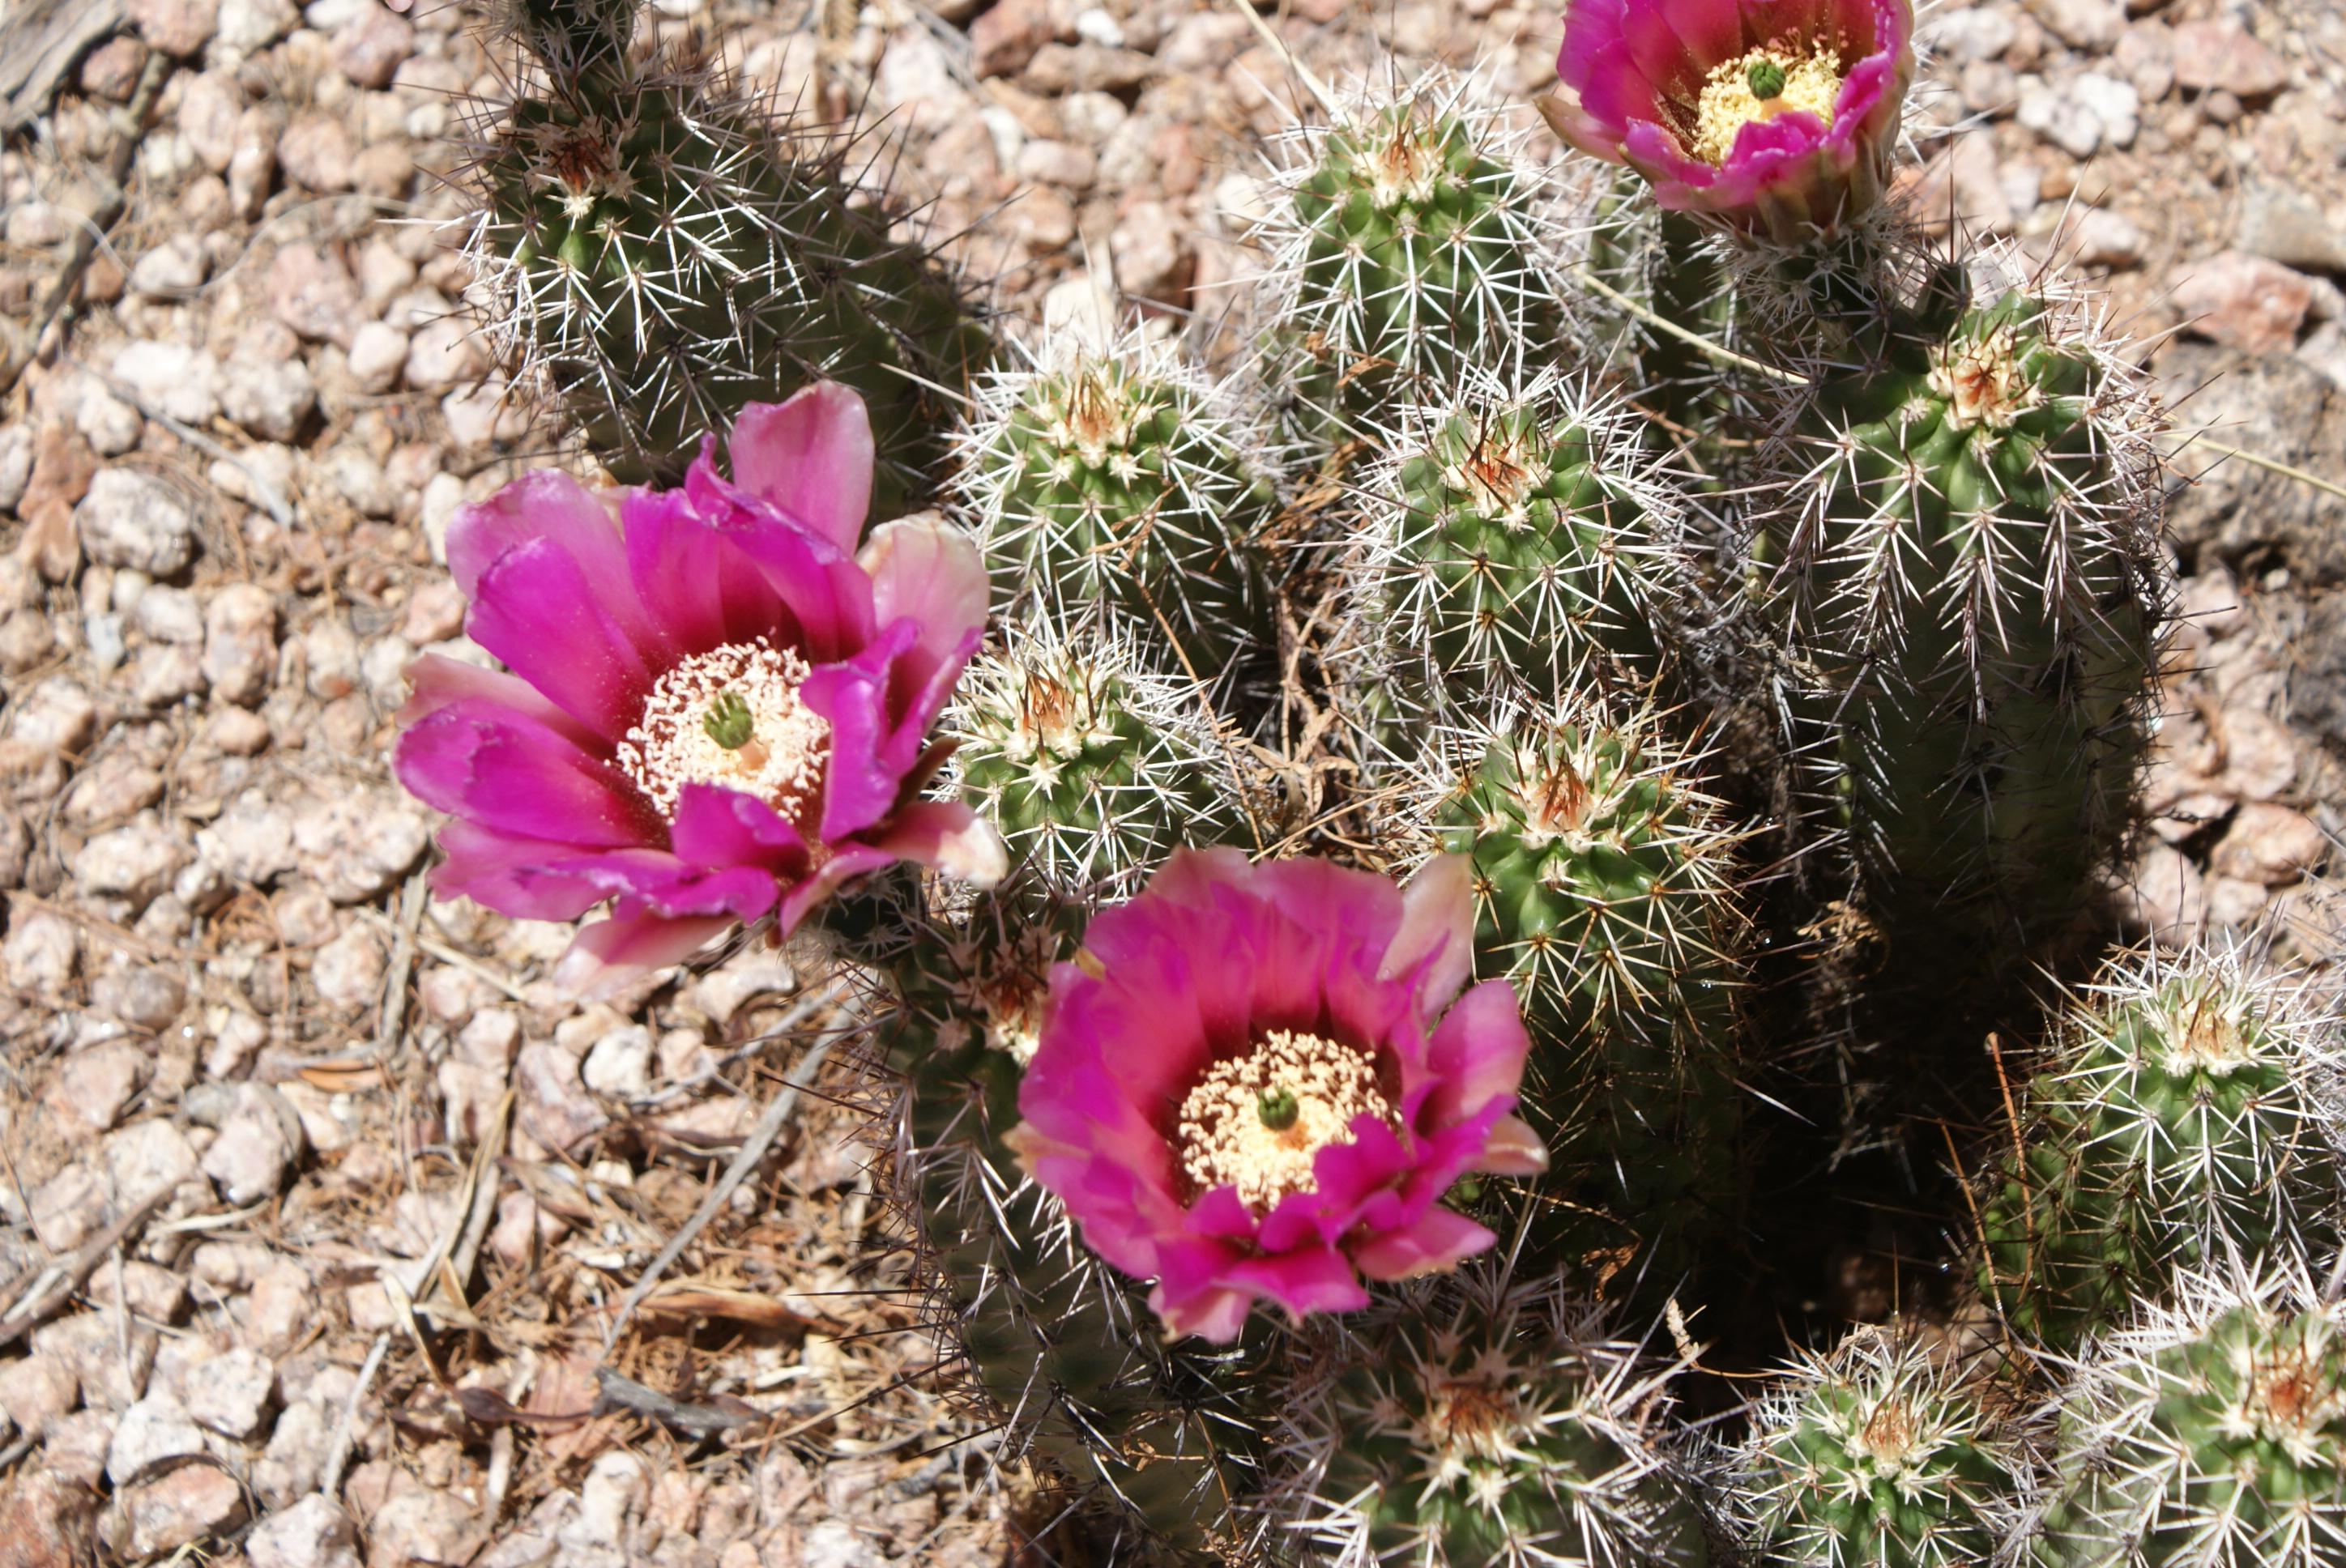 Cactus Flowers Are Blooming | The Word of Me...